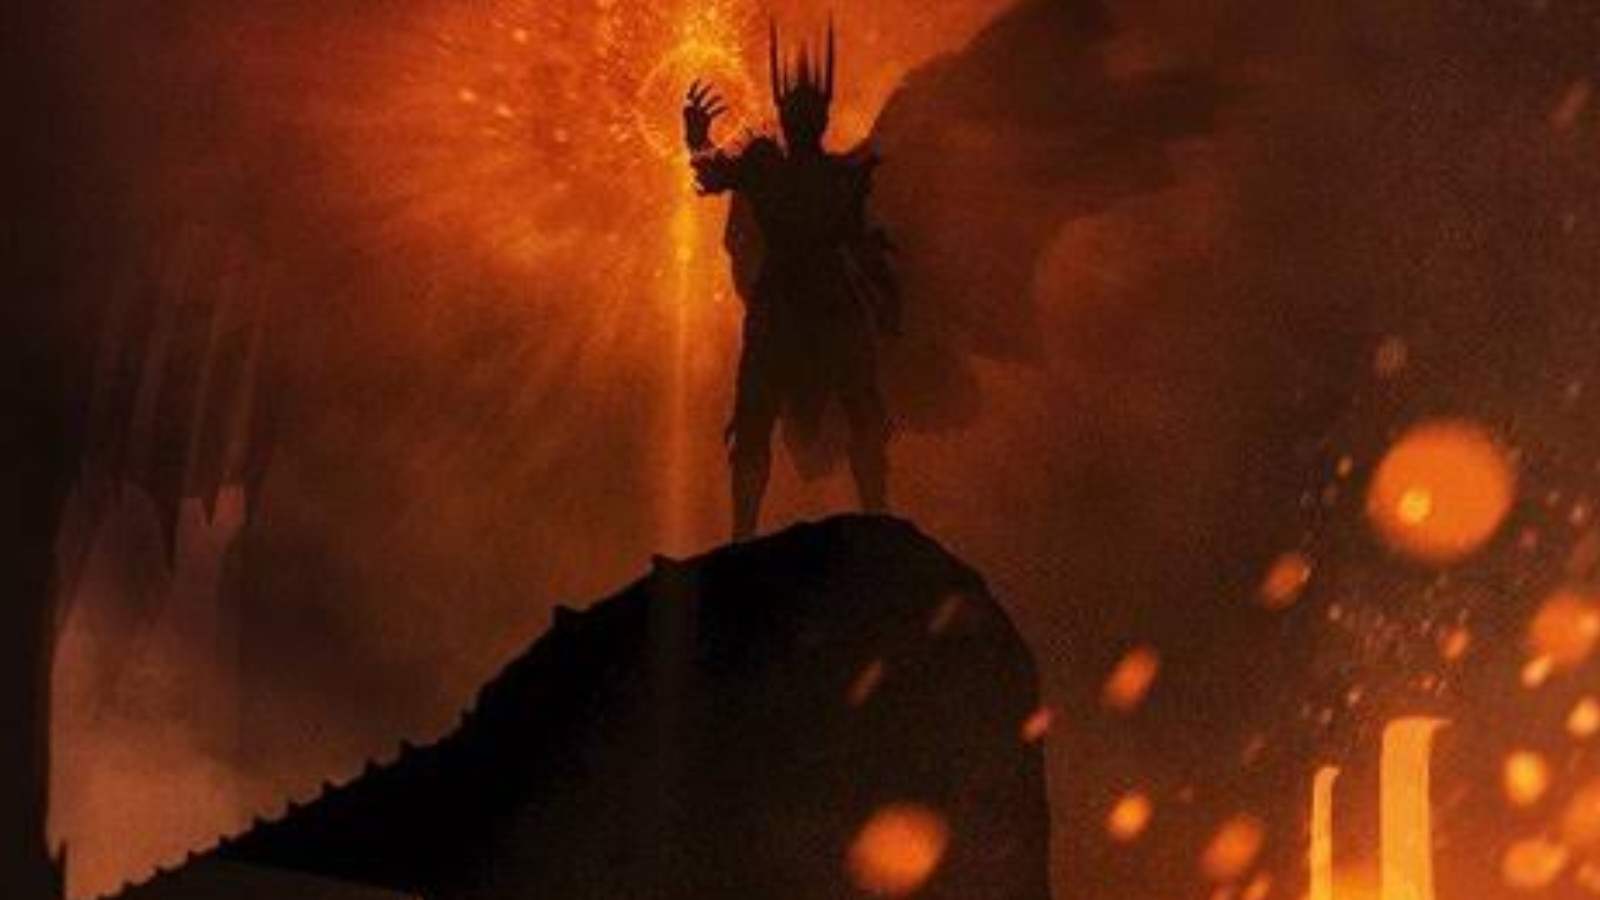 Sauron at Mount Doom in The Rings Of Power